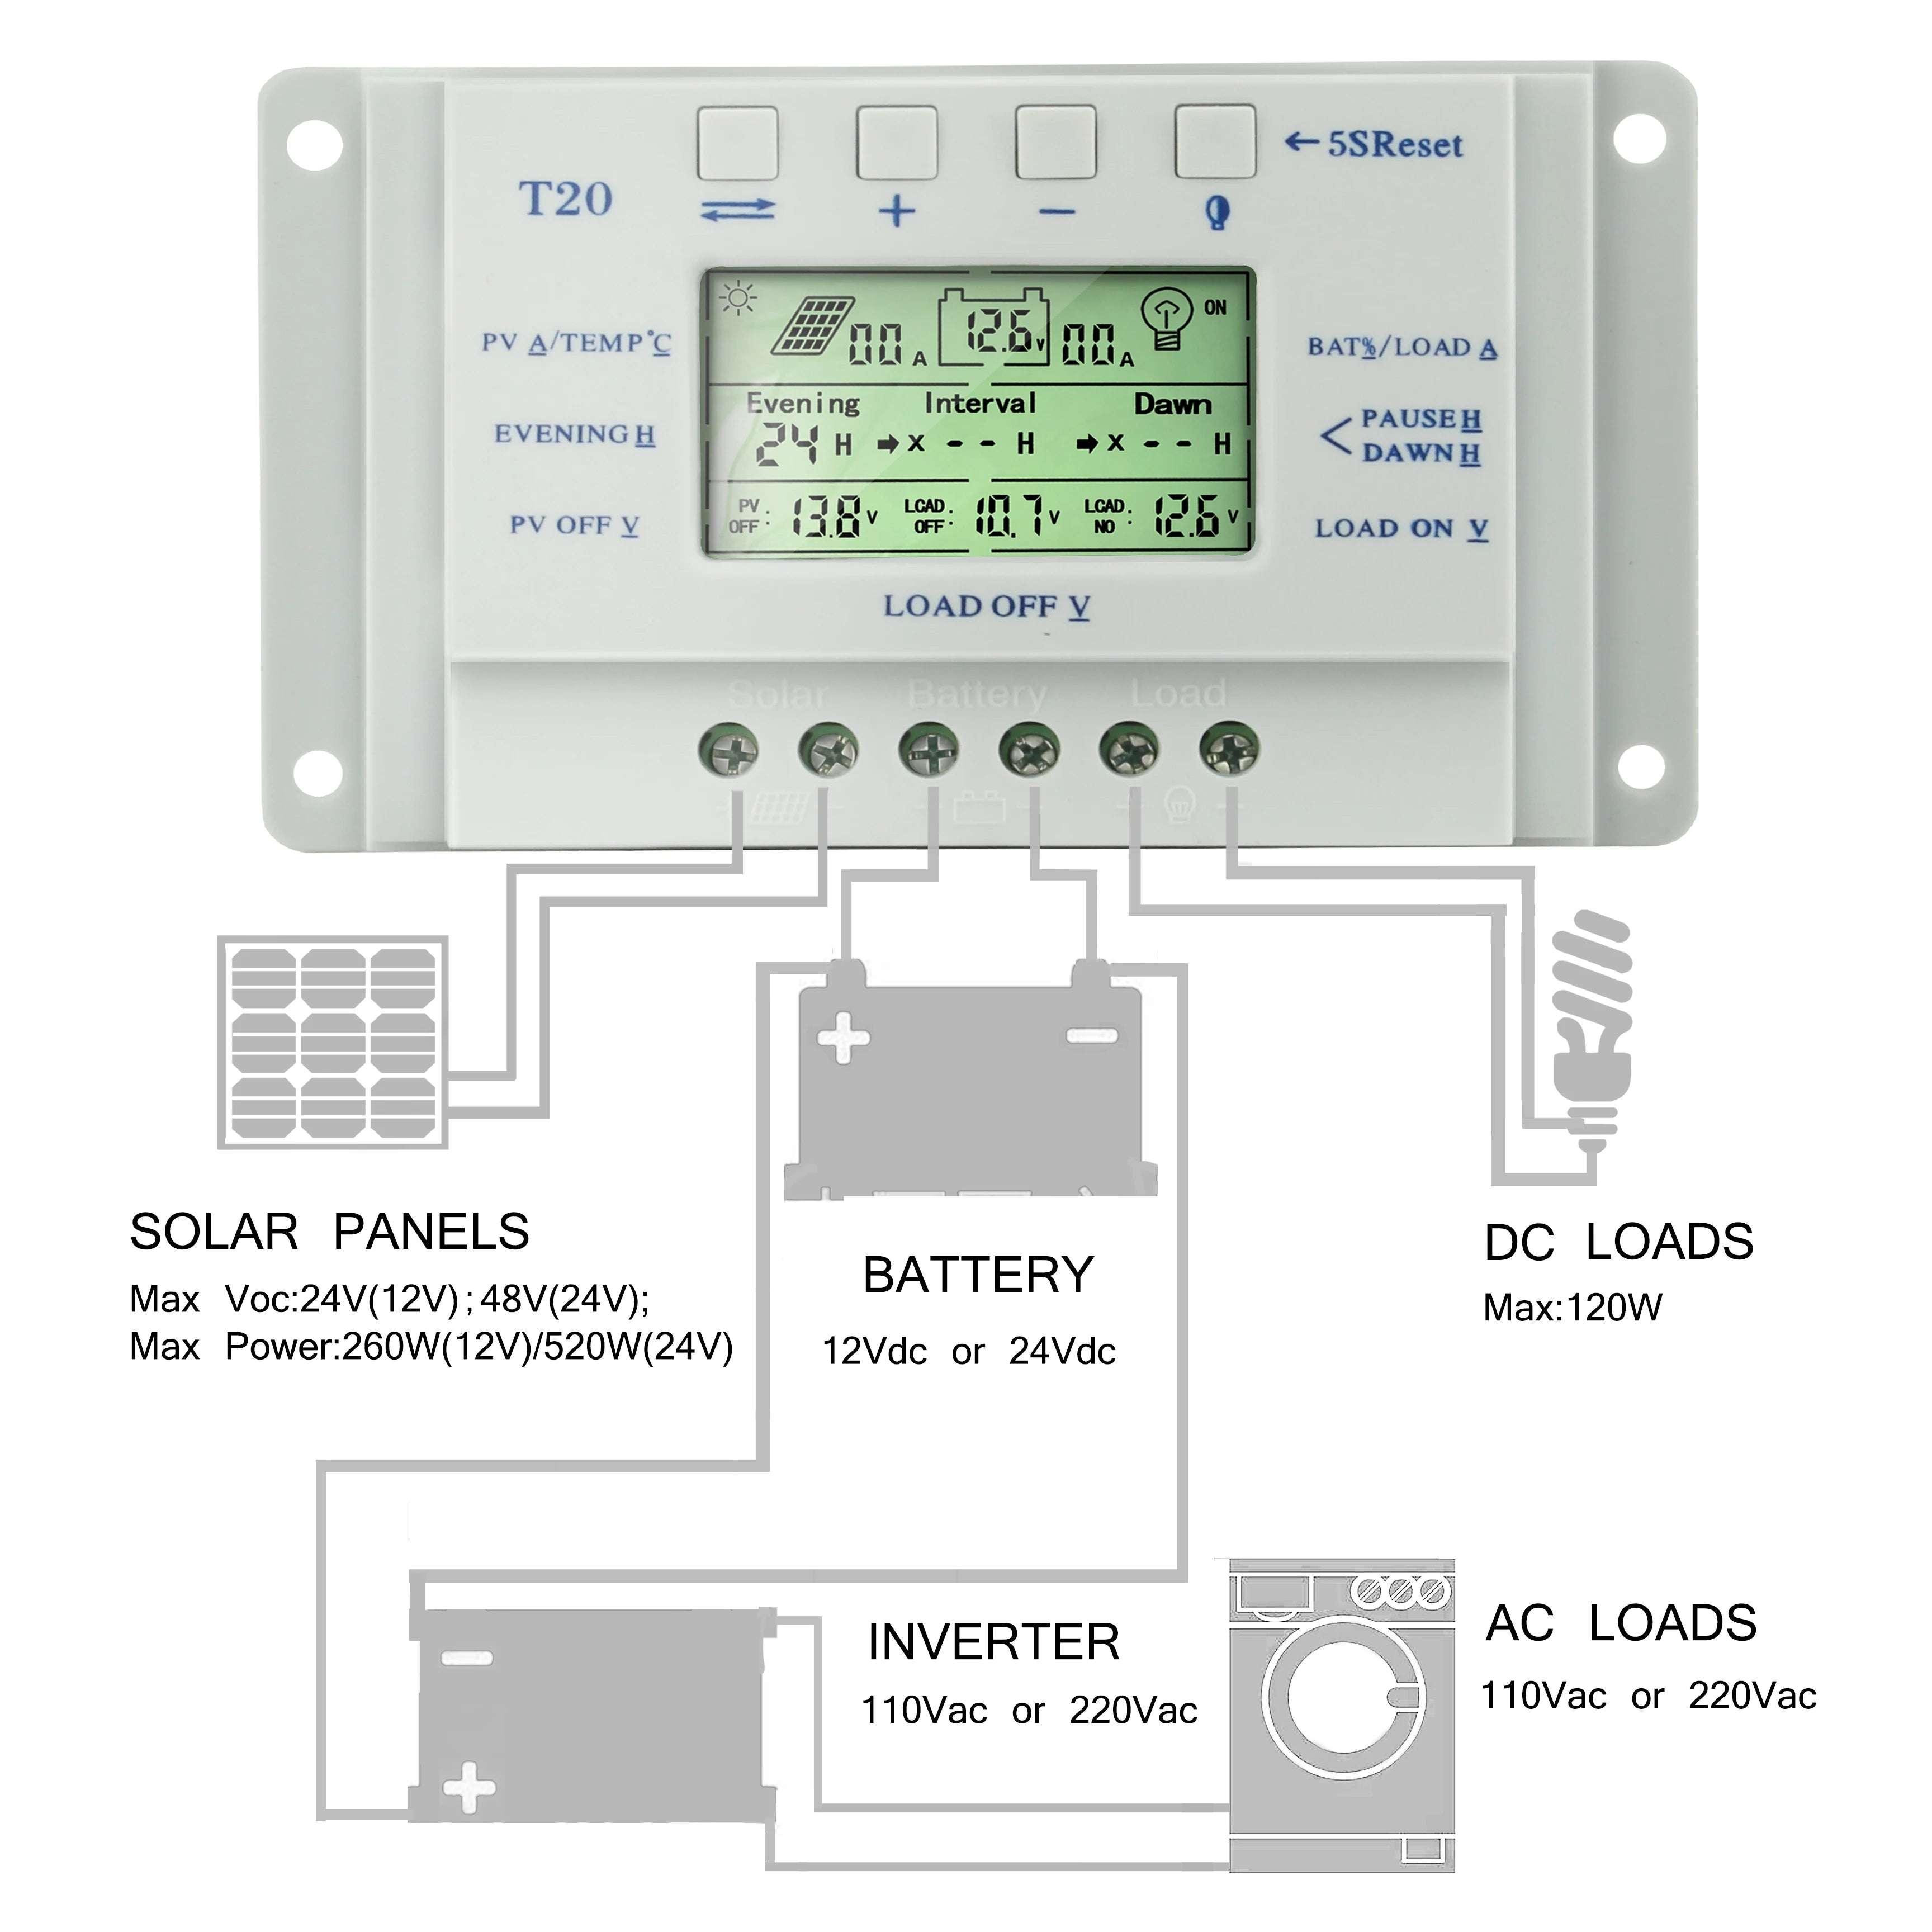 PowMr Solar Charge Controller, Renewable energy system with temperature display and battery level indicator.